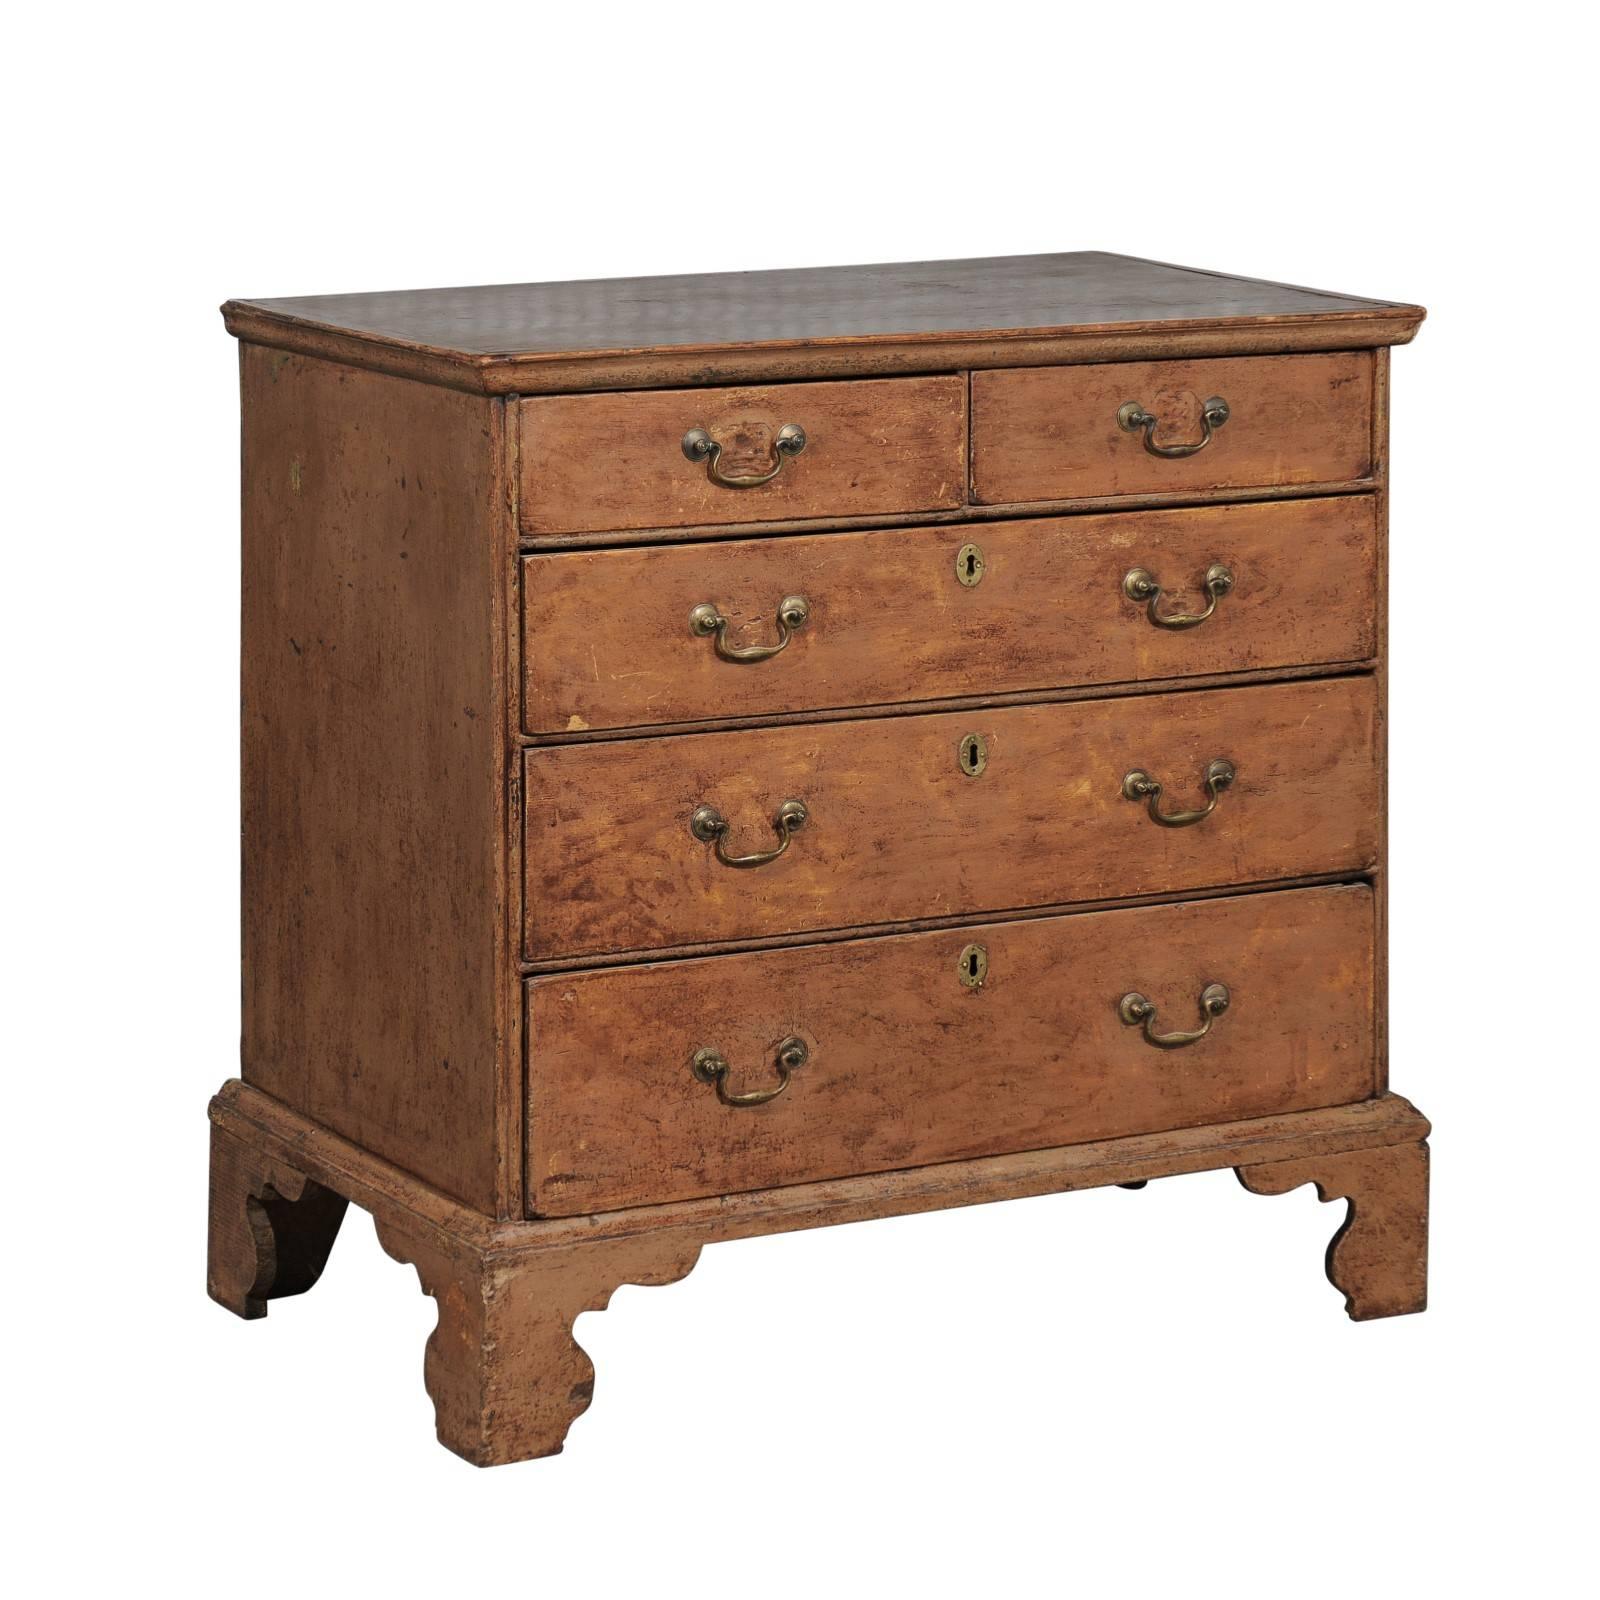 English 1800s George III Period Four-Drawer Painted Chest with Bracket Feet For Sale